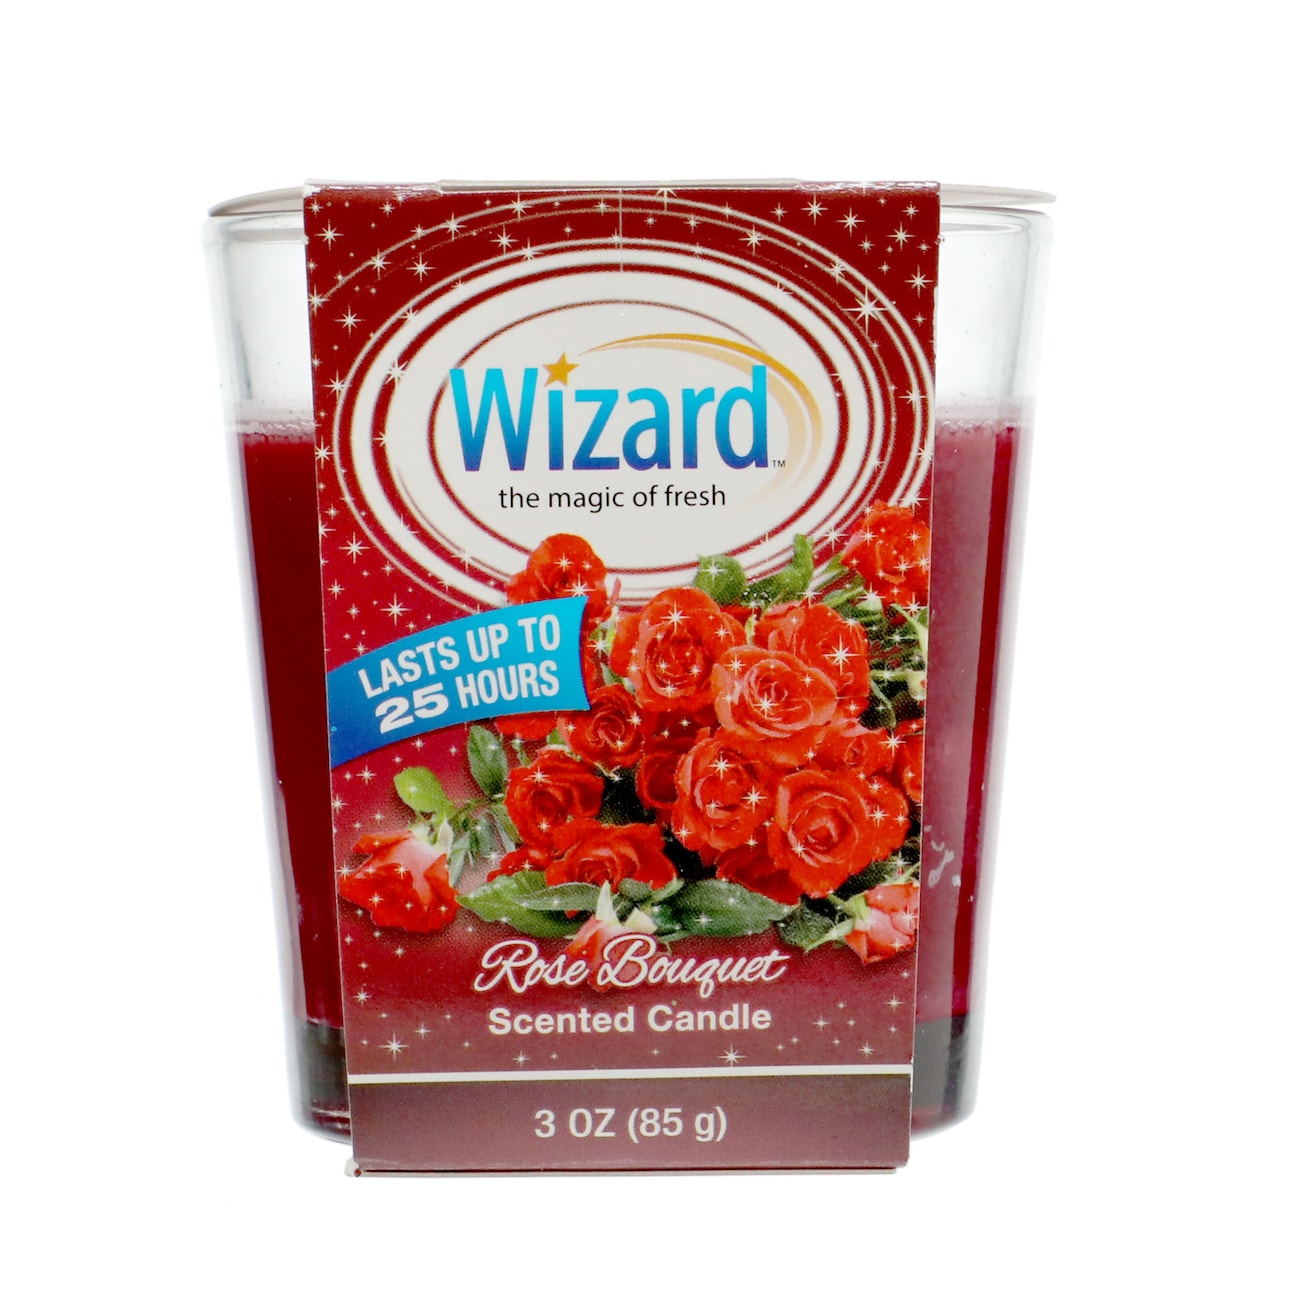 WIZARD 3OZ SCENTED CANDLES ROSE BOUQUET 12/CS